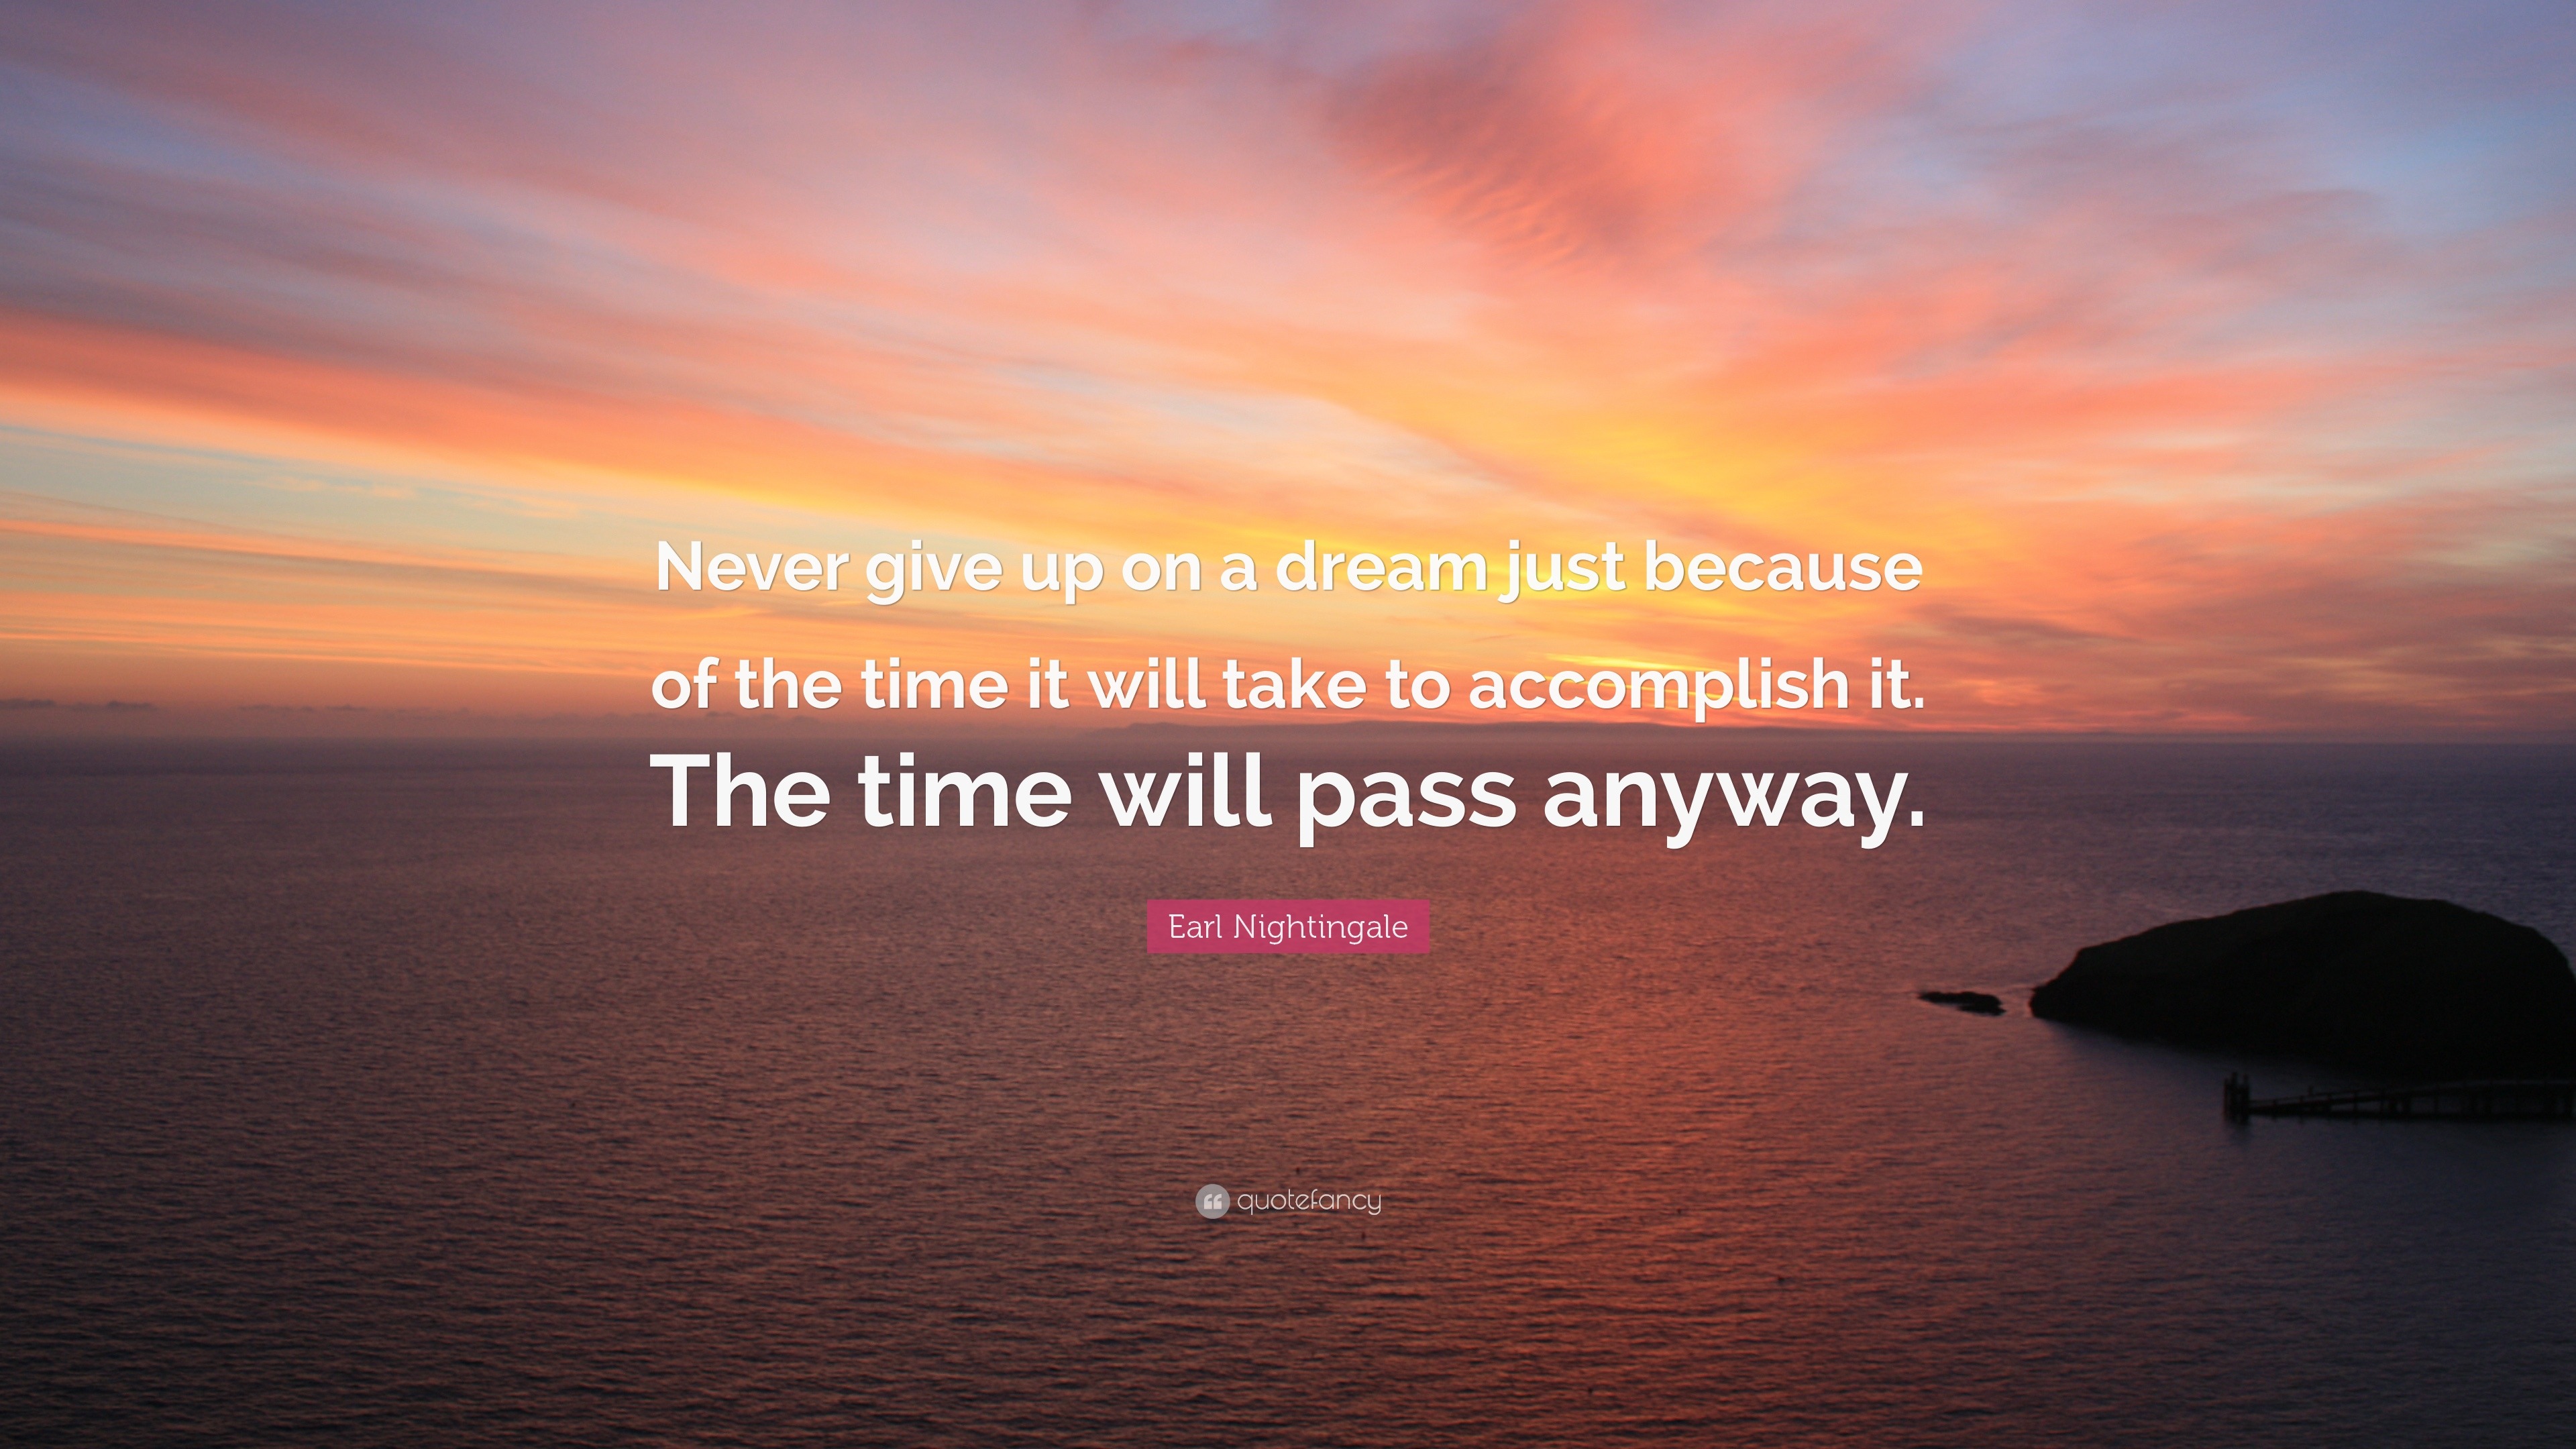 Earl Nightingale Quote Never Give Up On A Dream Just Because Of The Time It Will Take To Accomplish It The Time Will Pass Anyway 28 Wallpapers Quotefancy